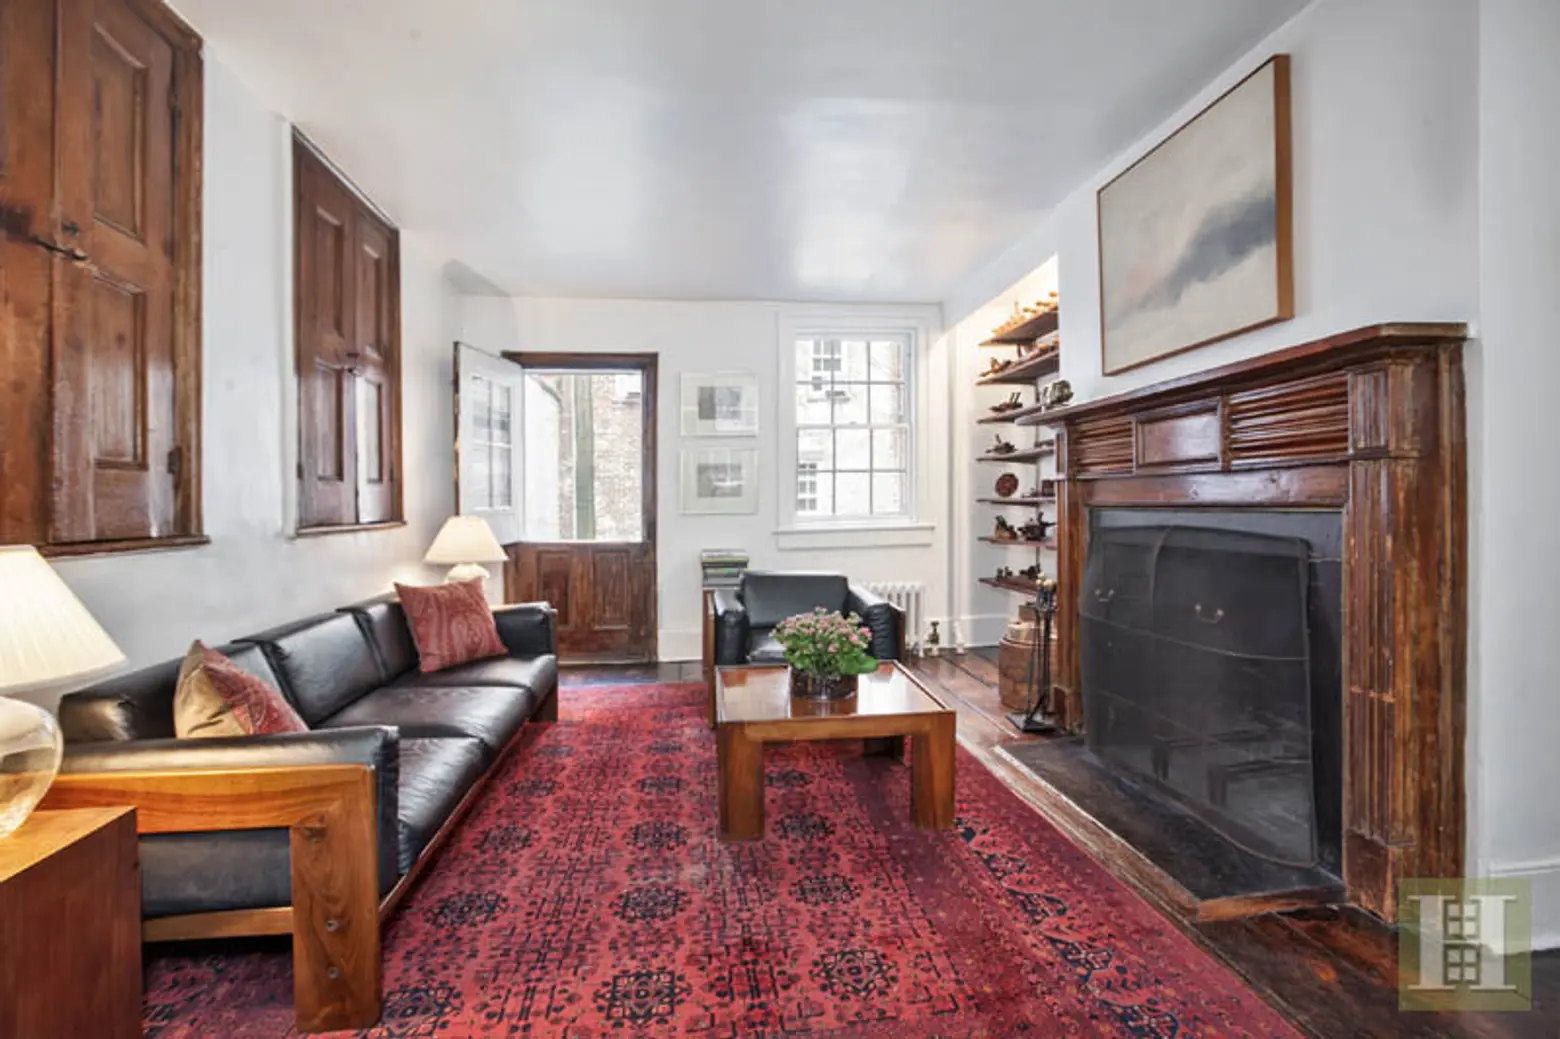 Photos of 131 Charles St for broker Wendy Gleason of Halstead